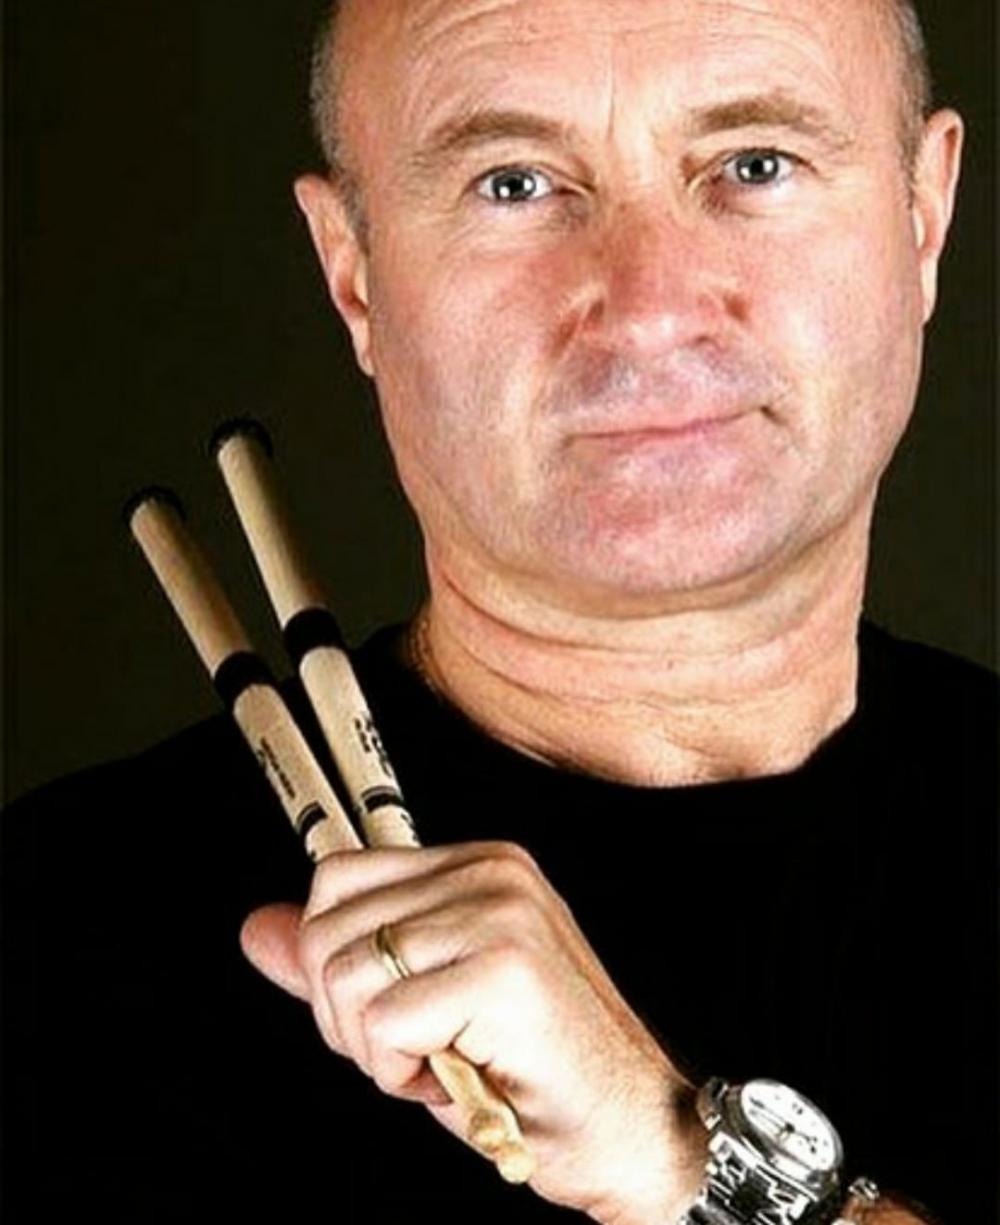 The Weekend Leader - Phil Collins touring after 14 years, can barely hold a drumstick